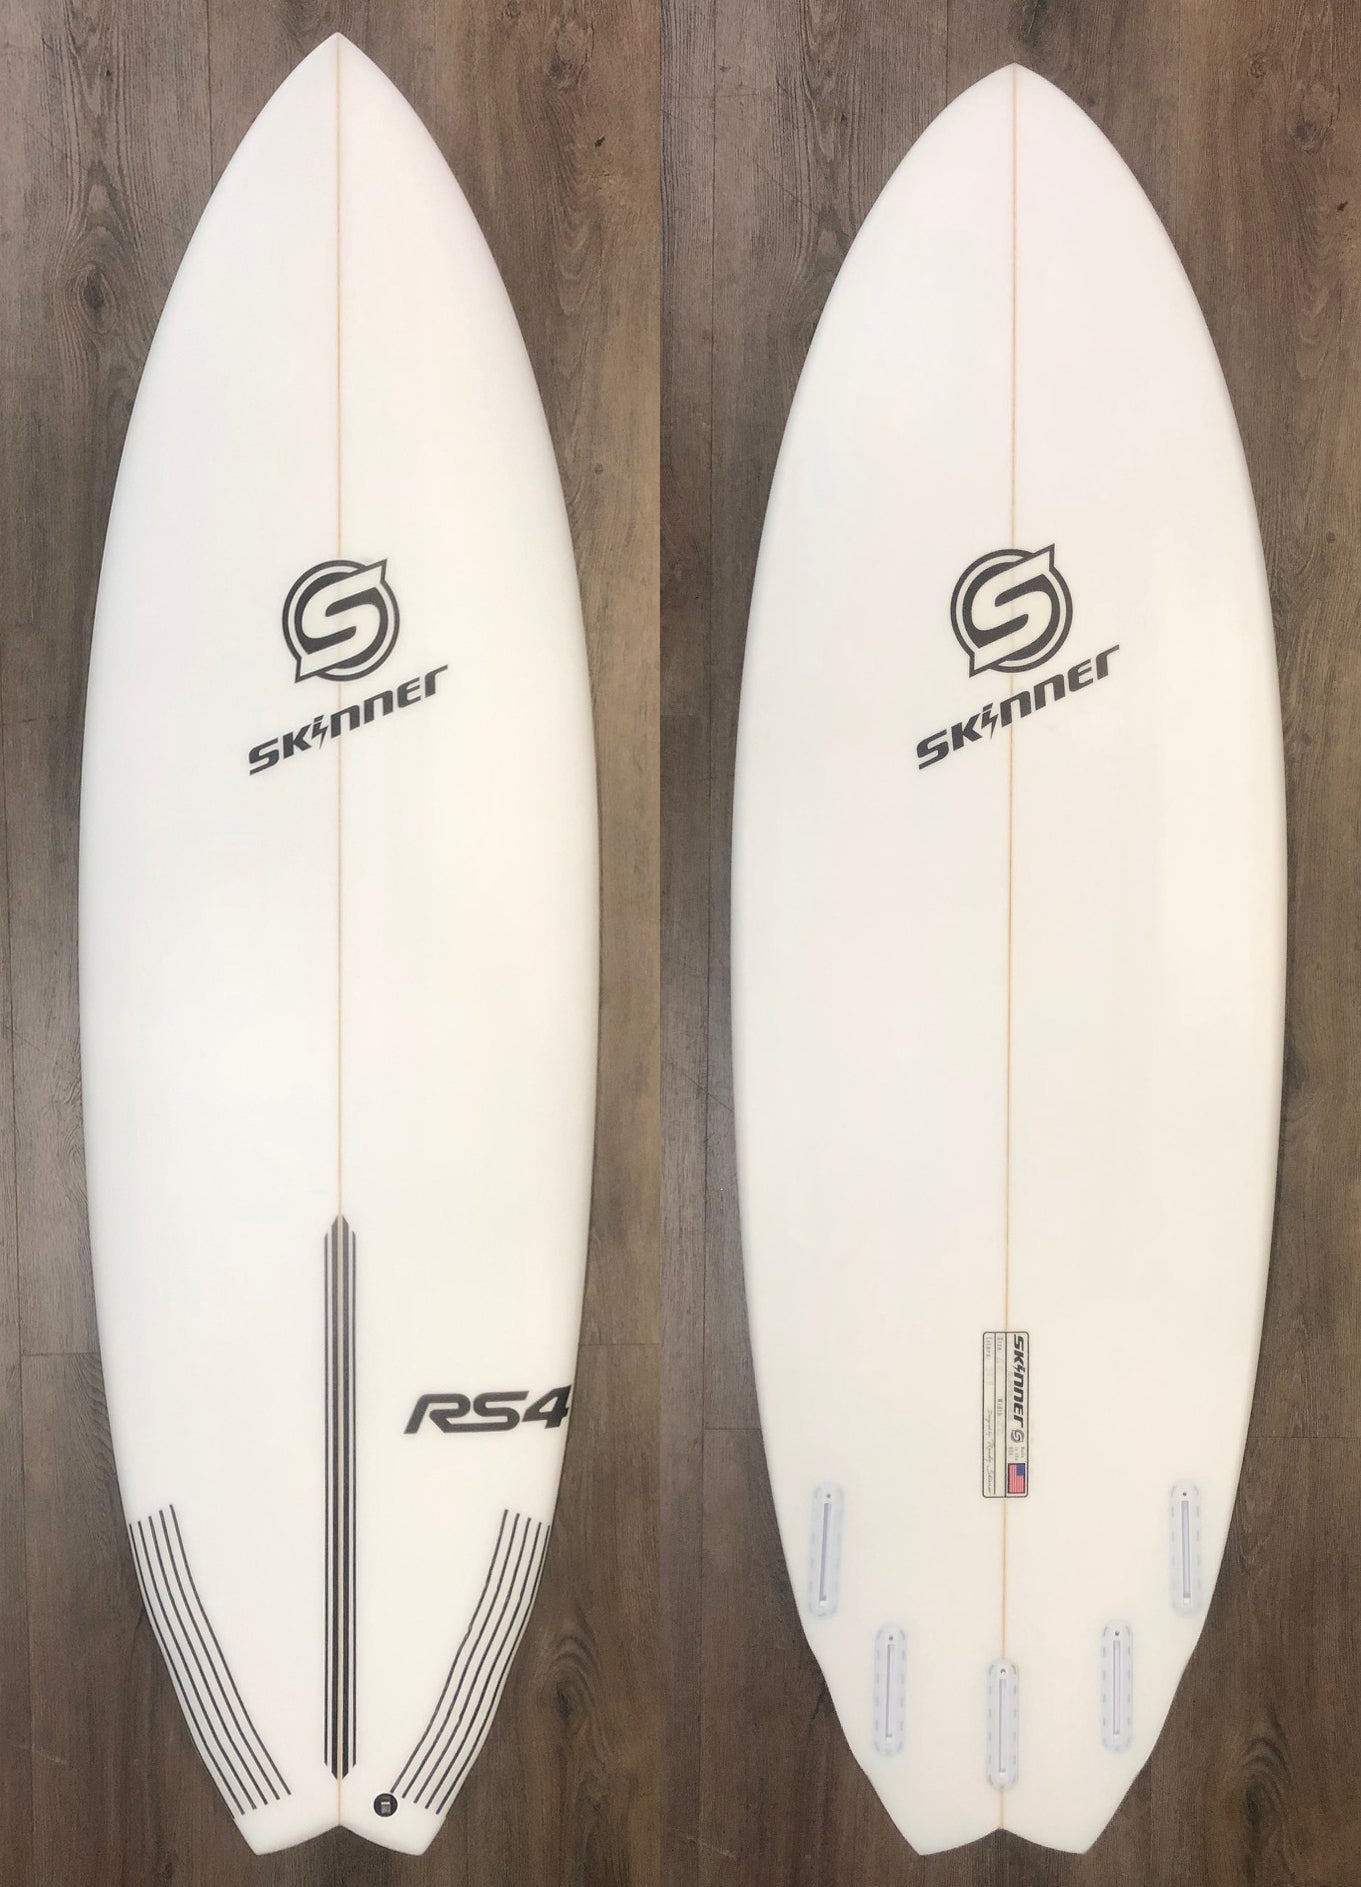 SOLD Skinner Surfboards 6'2 x 22 RS4 Fish Epoxy 37.3 Liters 5 Futures Plugs Surfboard